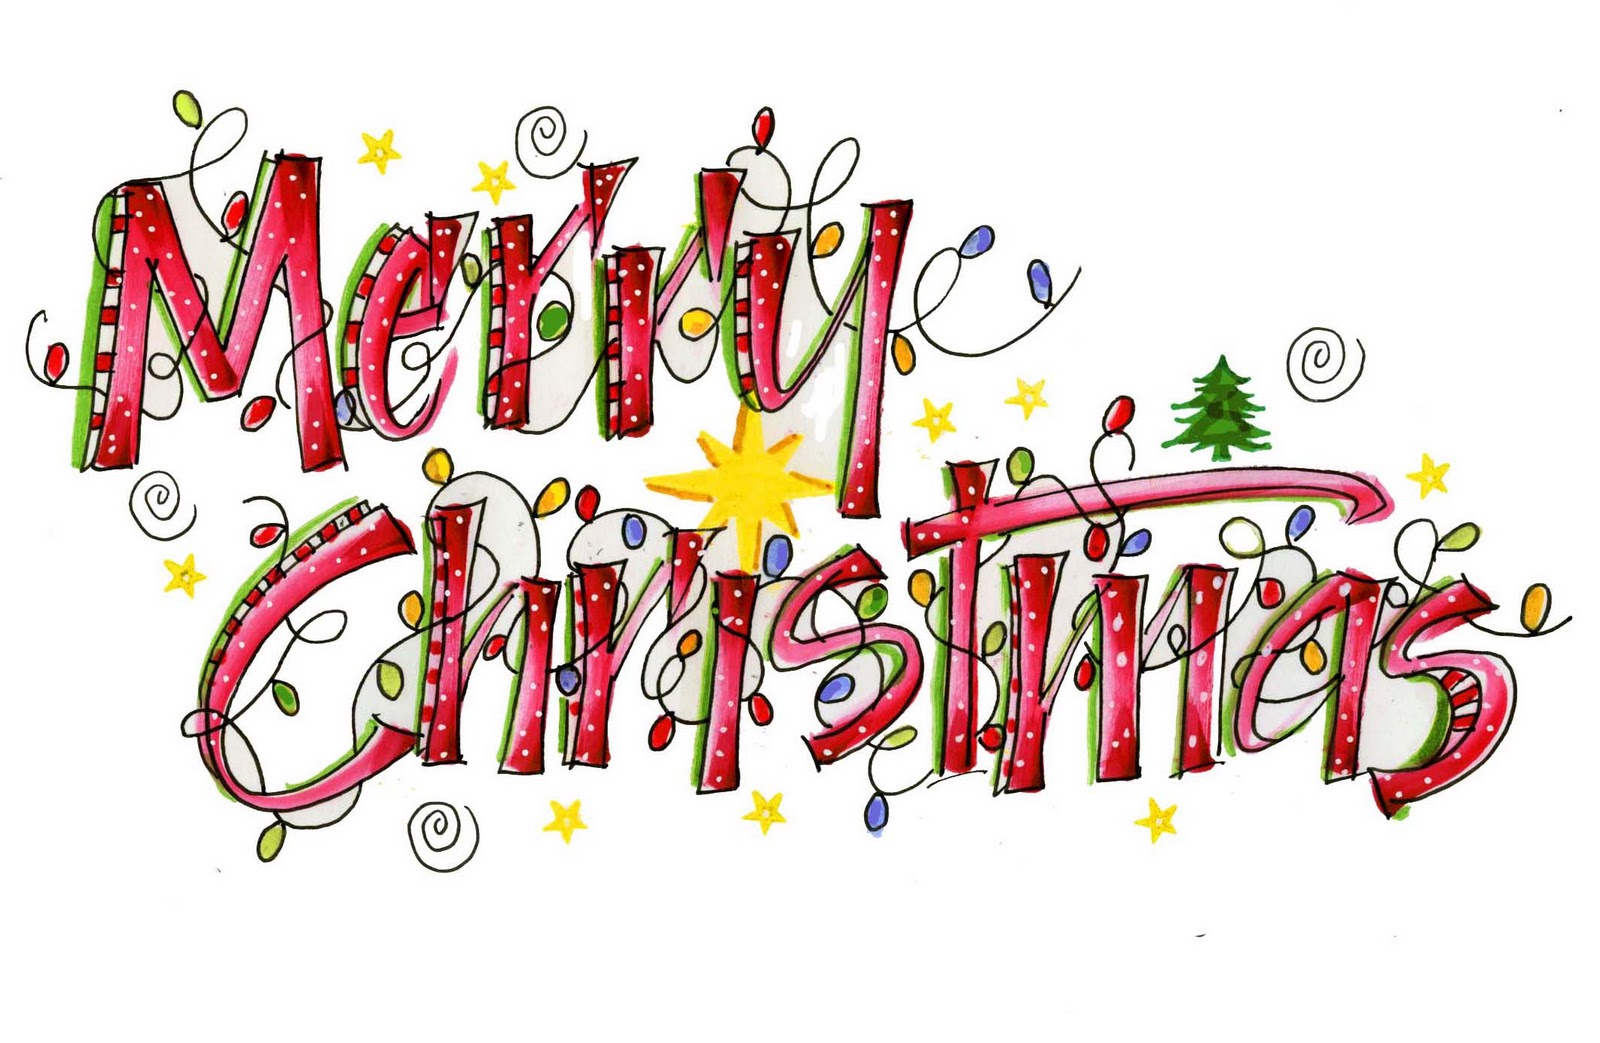 This Merry Christmas Images Clip Art Is Available Only For Personal